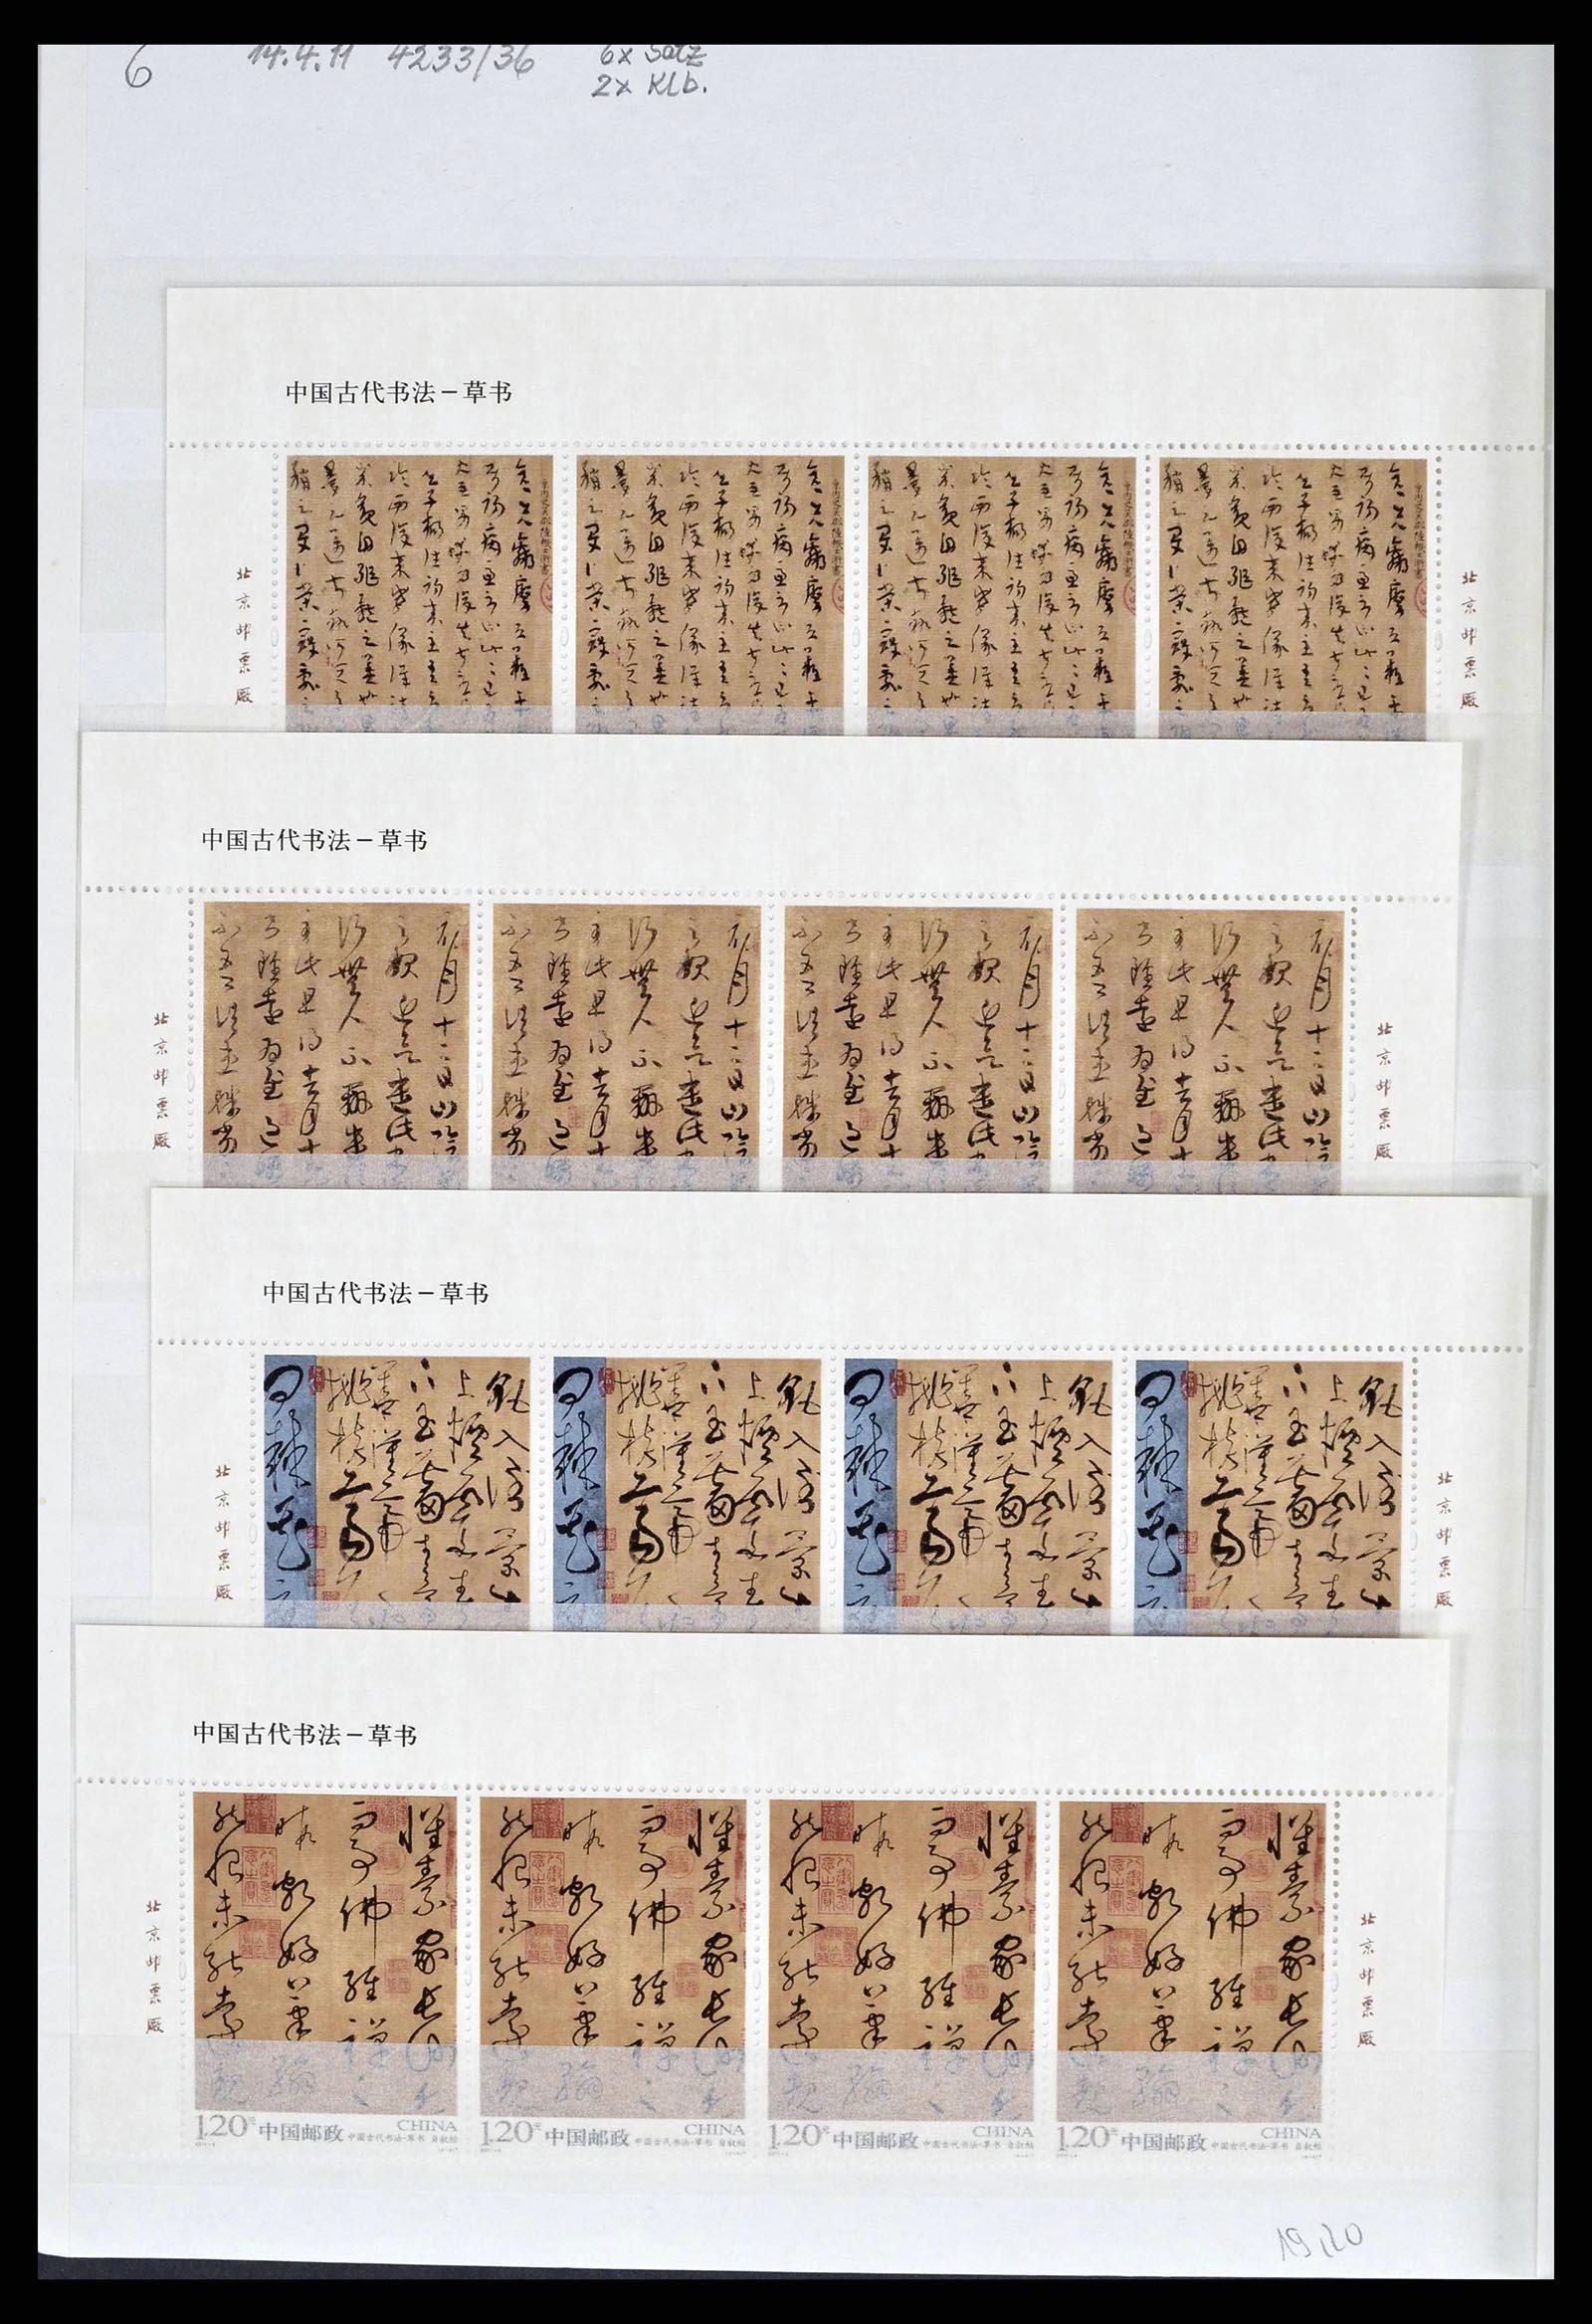 38536 0010 - Stamp collection 38536 China 2011.